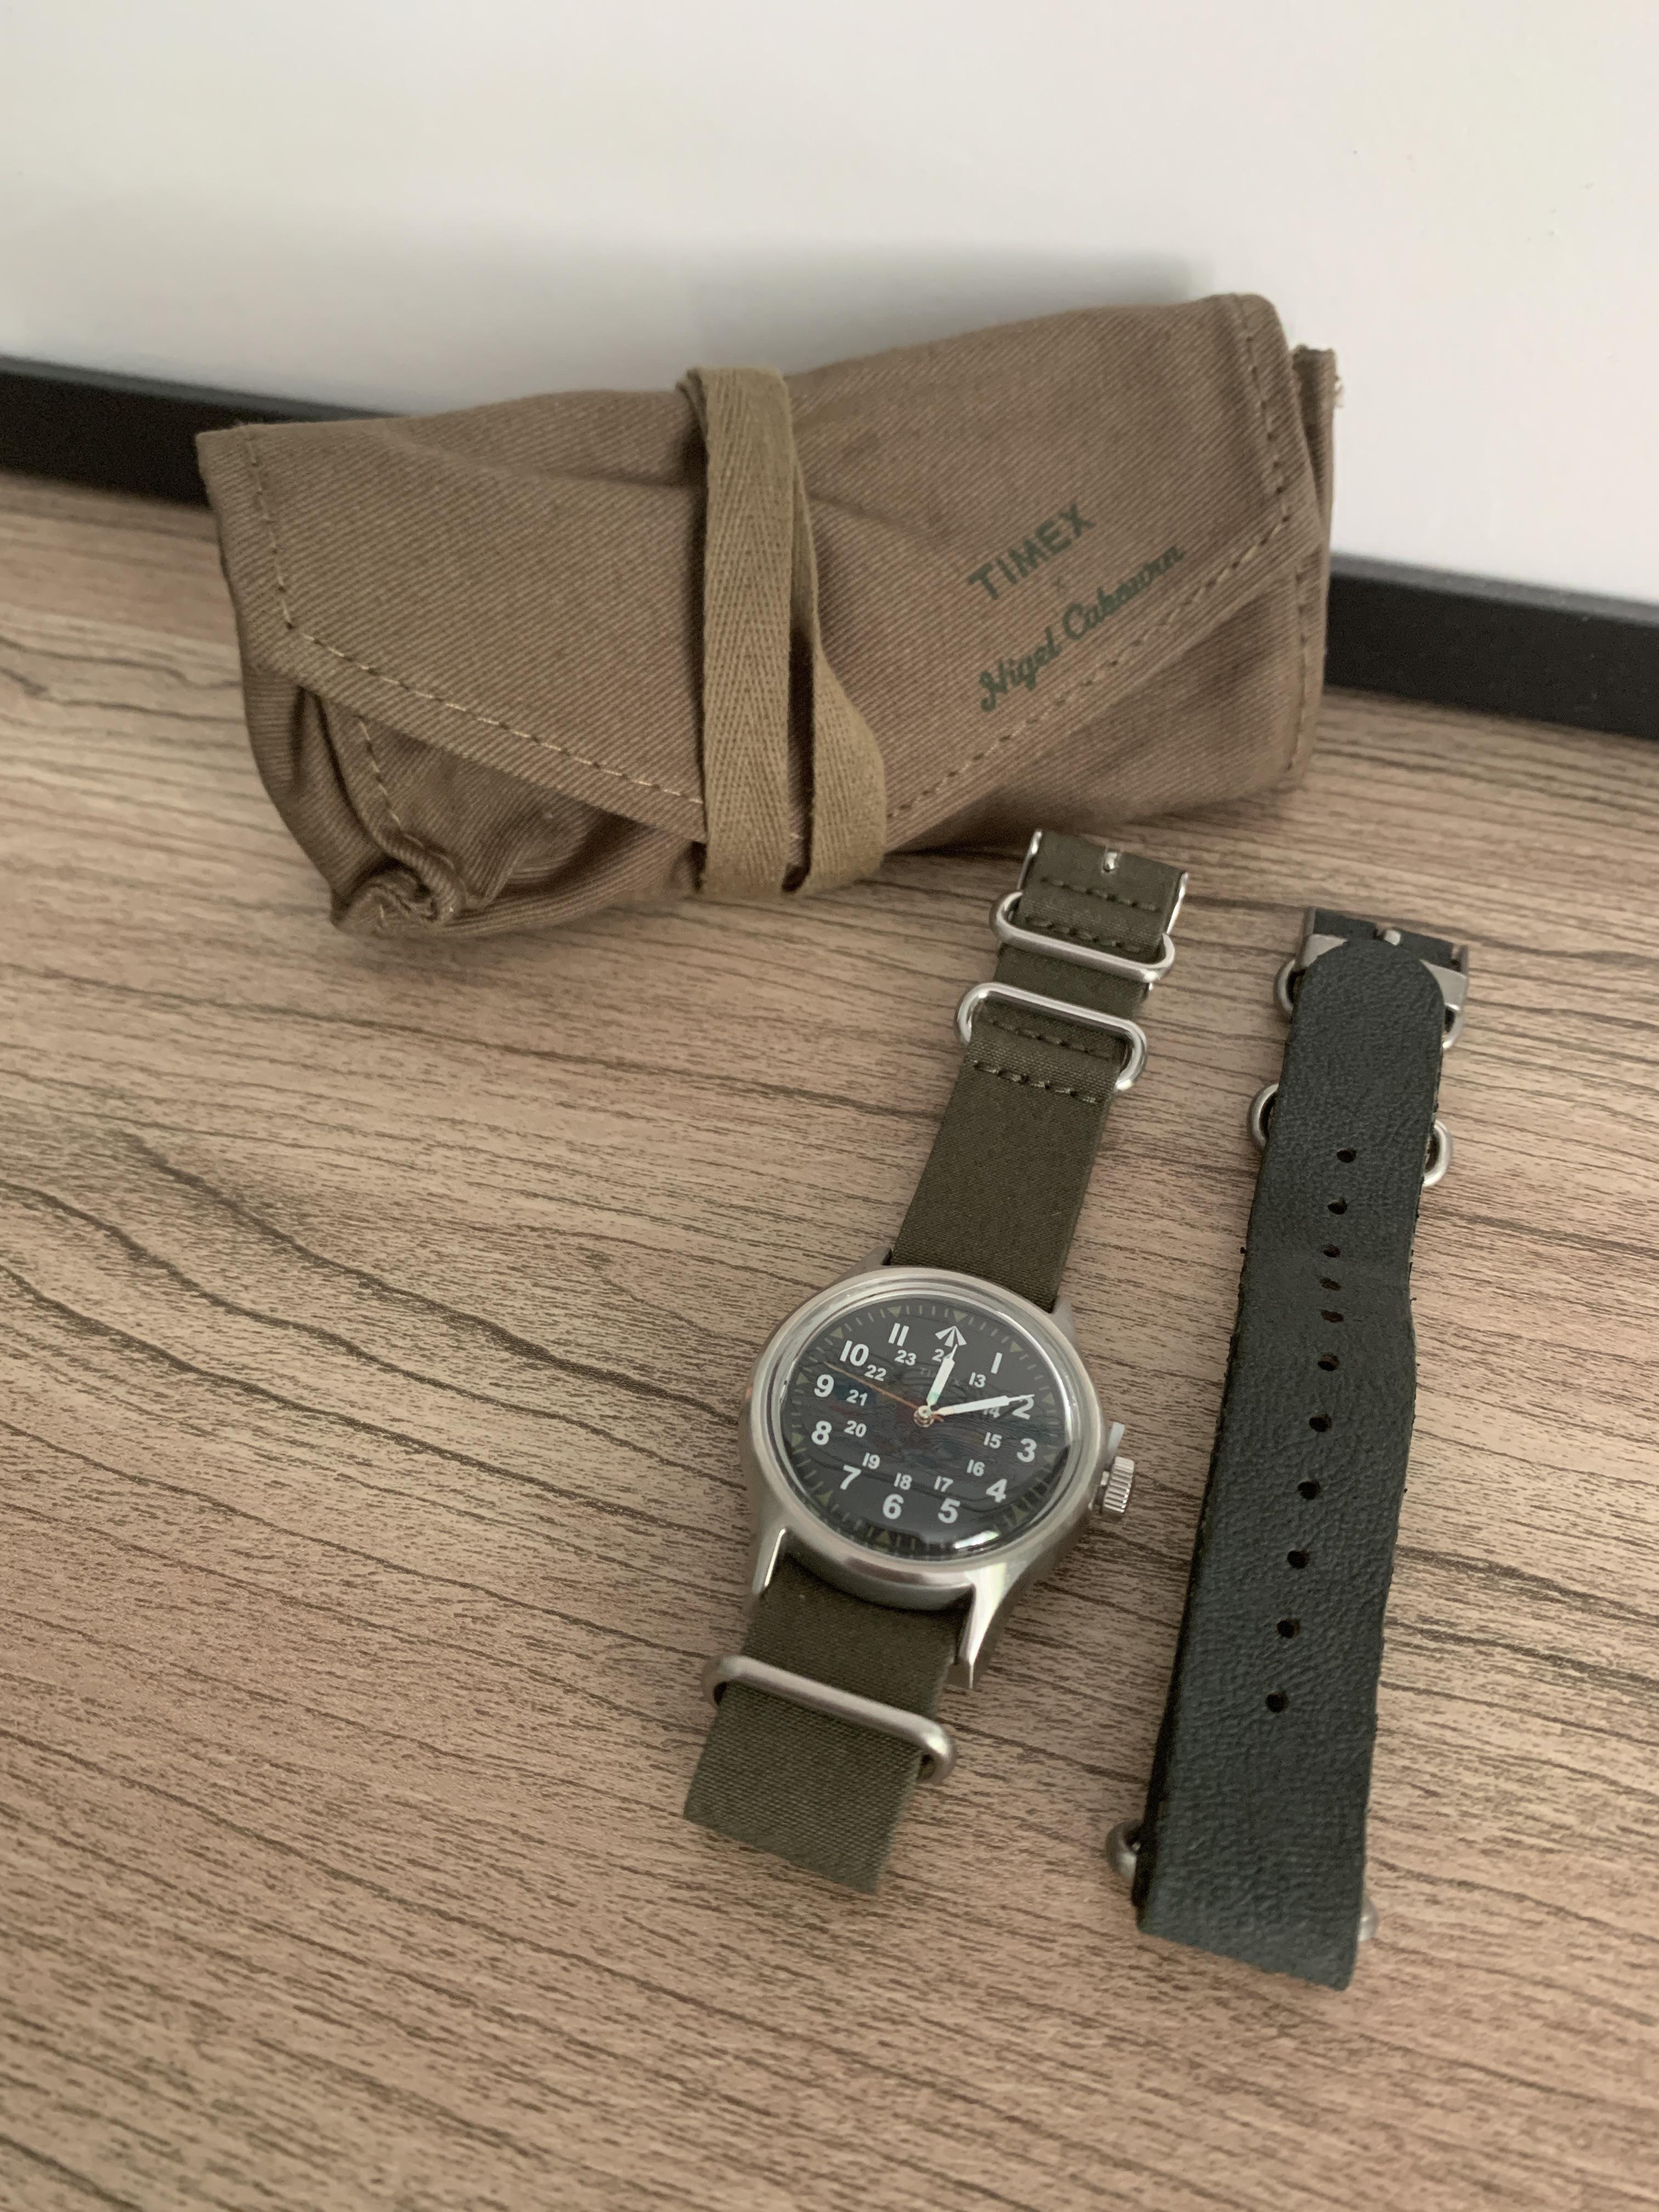 Timex x Nigel Cabourn 'Nam' Watch Collab 36mm MK1 Steel Sold Out